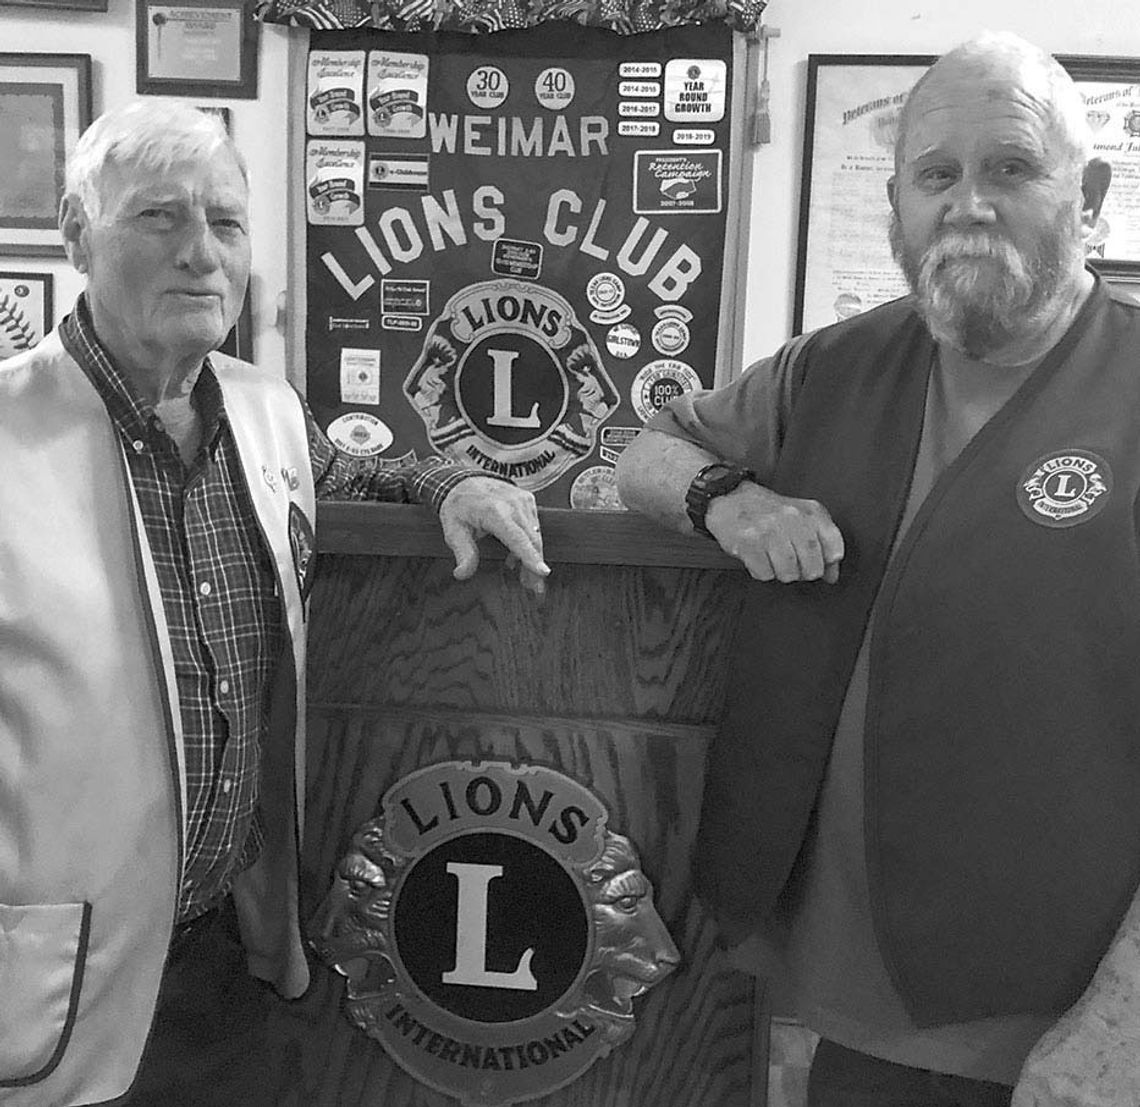 LIONS CLUB WELCOMES NEW MEMBER